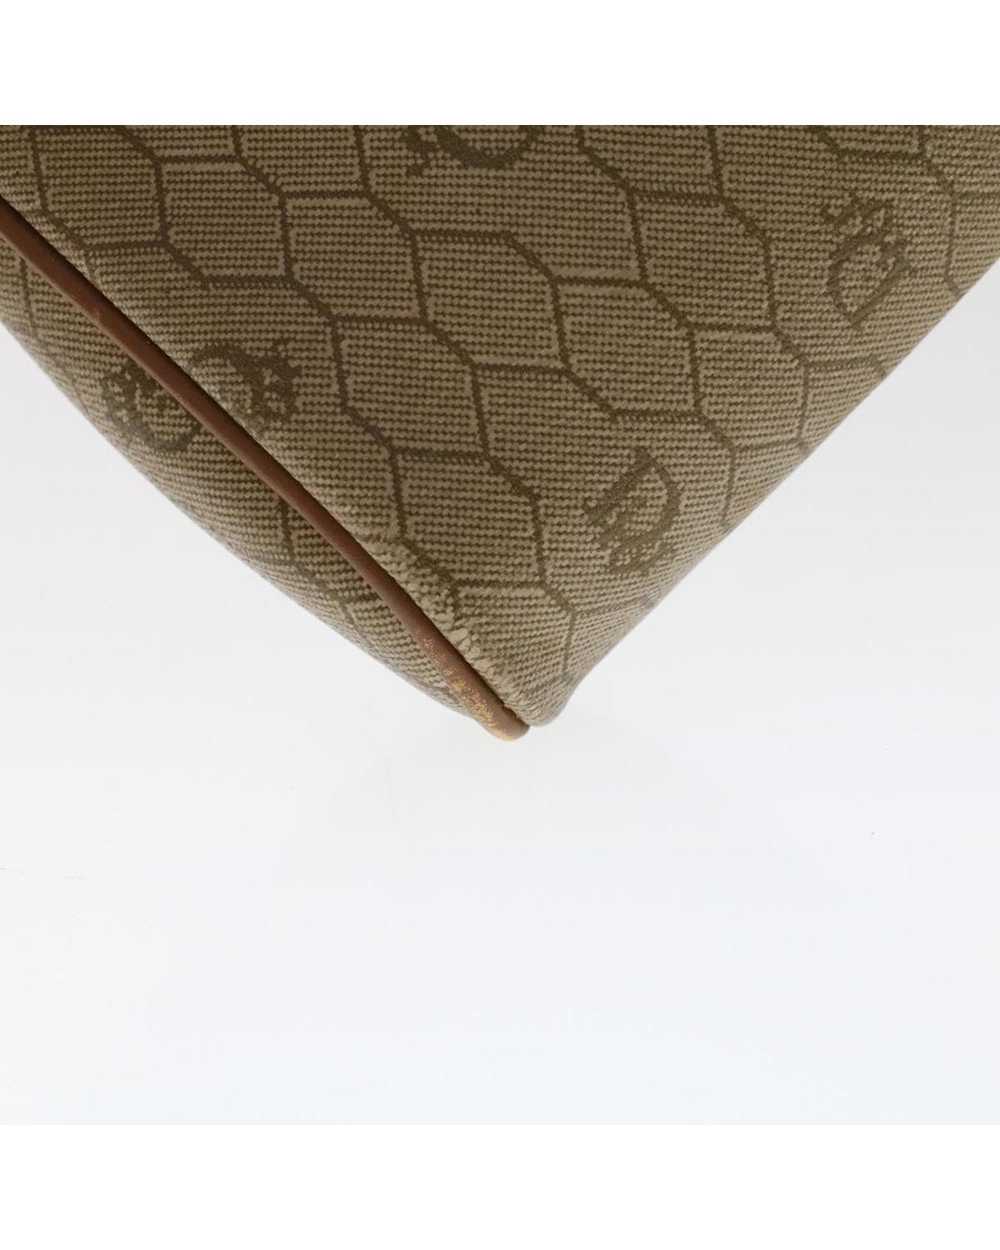 Dior Honeycomb Canvas Clutch by Dior - image 7